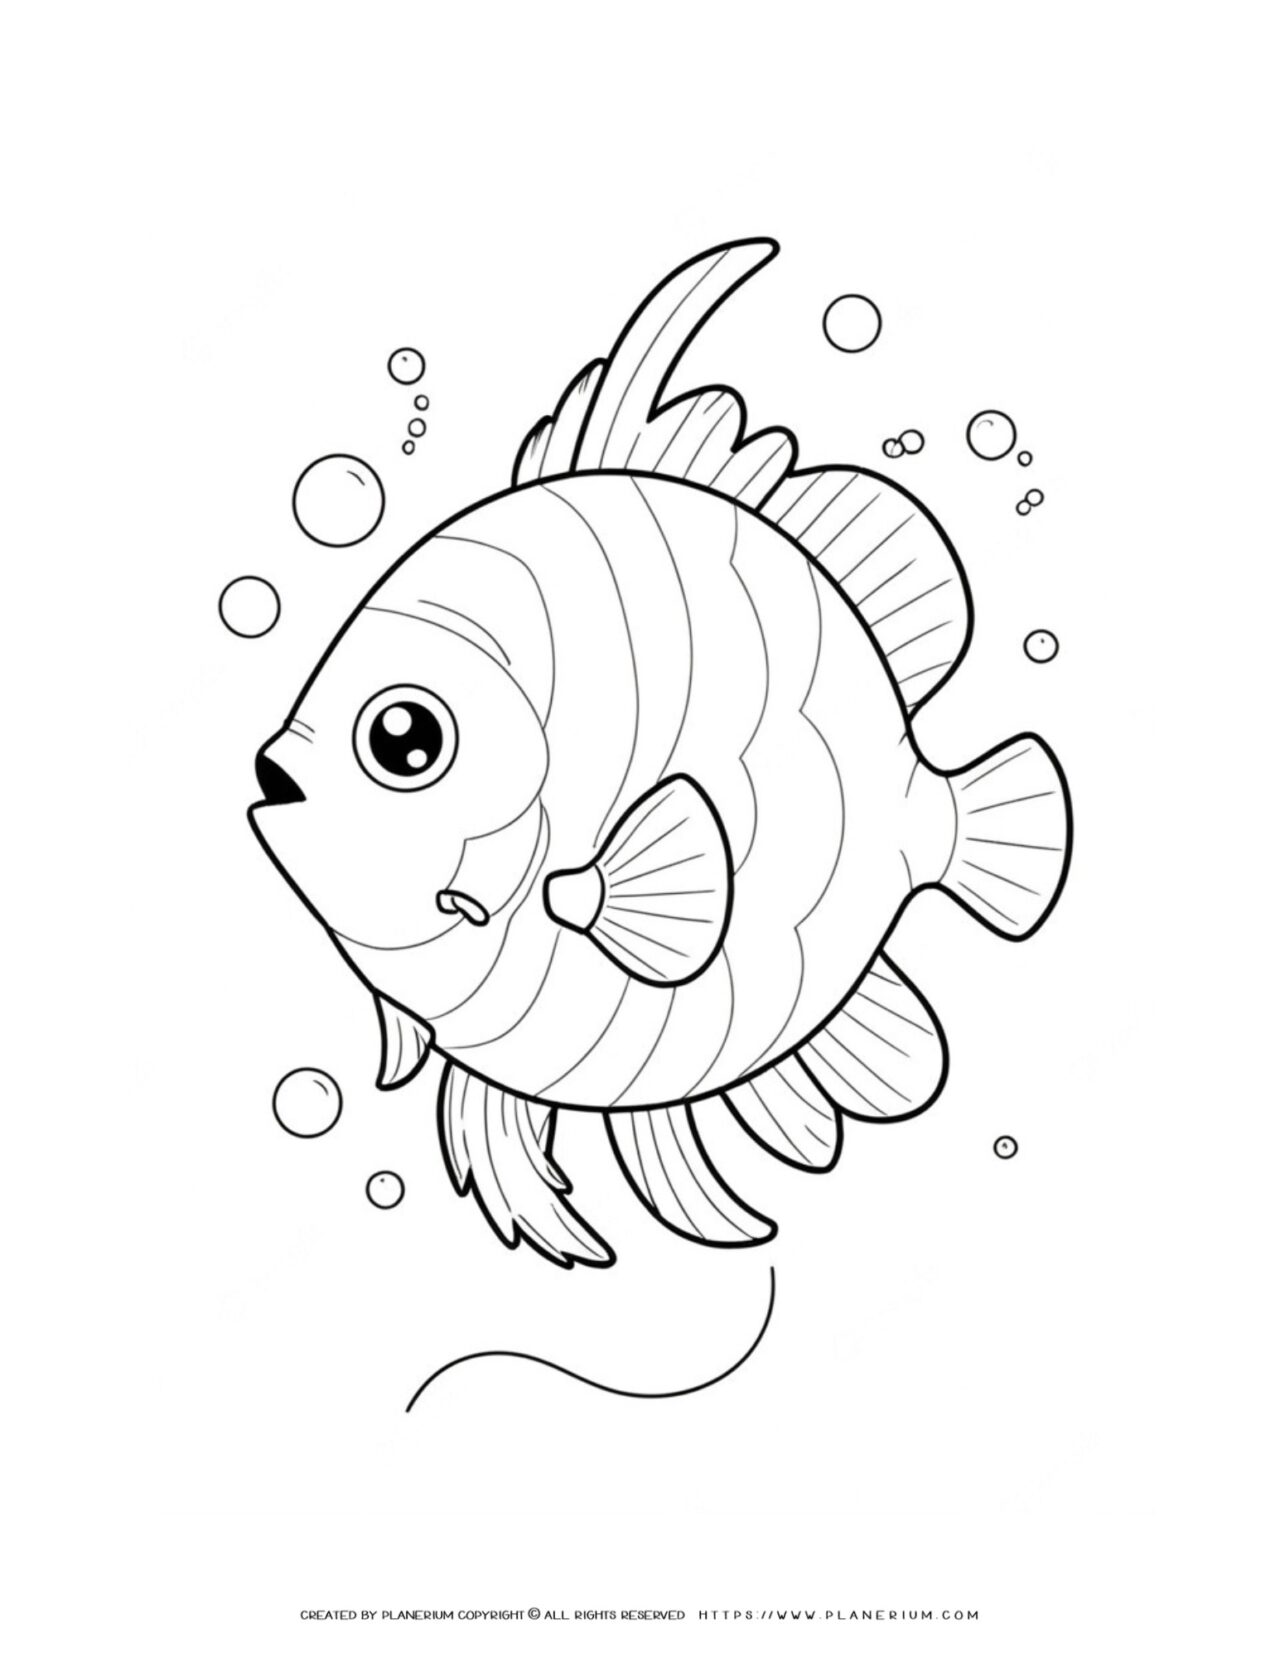 Coloring-page-featuring-cartoon-fish-with-bubbles